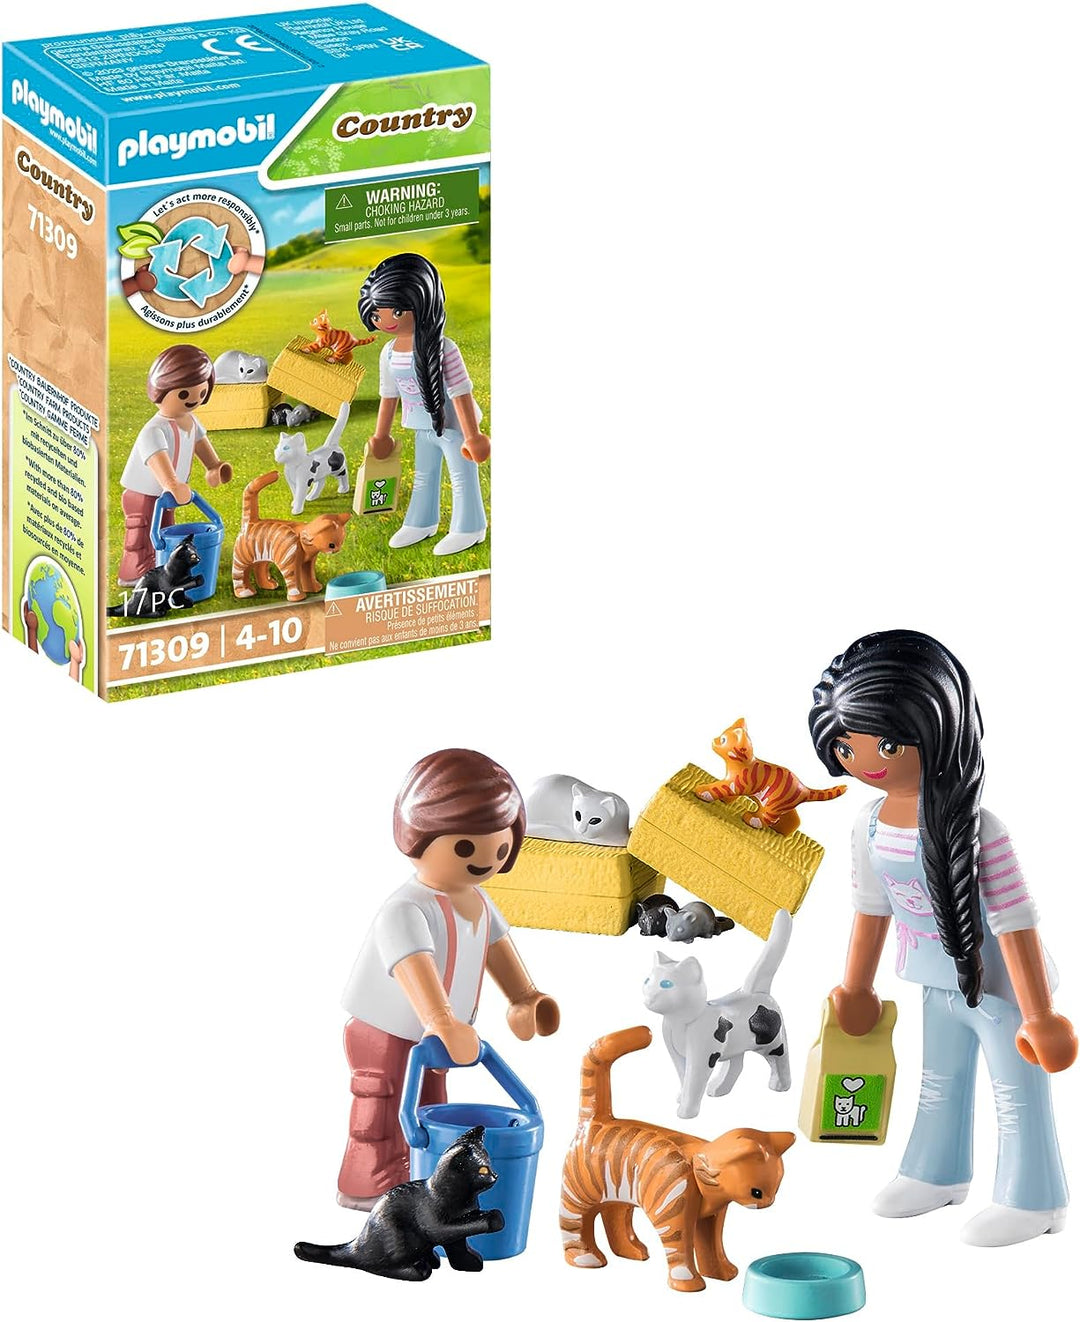 Playmobil 71309 Country Cat Family, cats and kittens, organic farm, Sustainable Toy, Fun Imaginative Role-Play